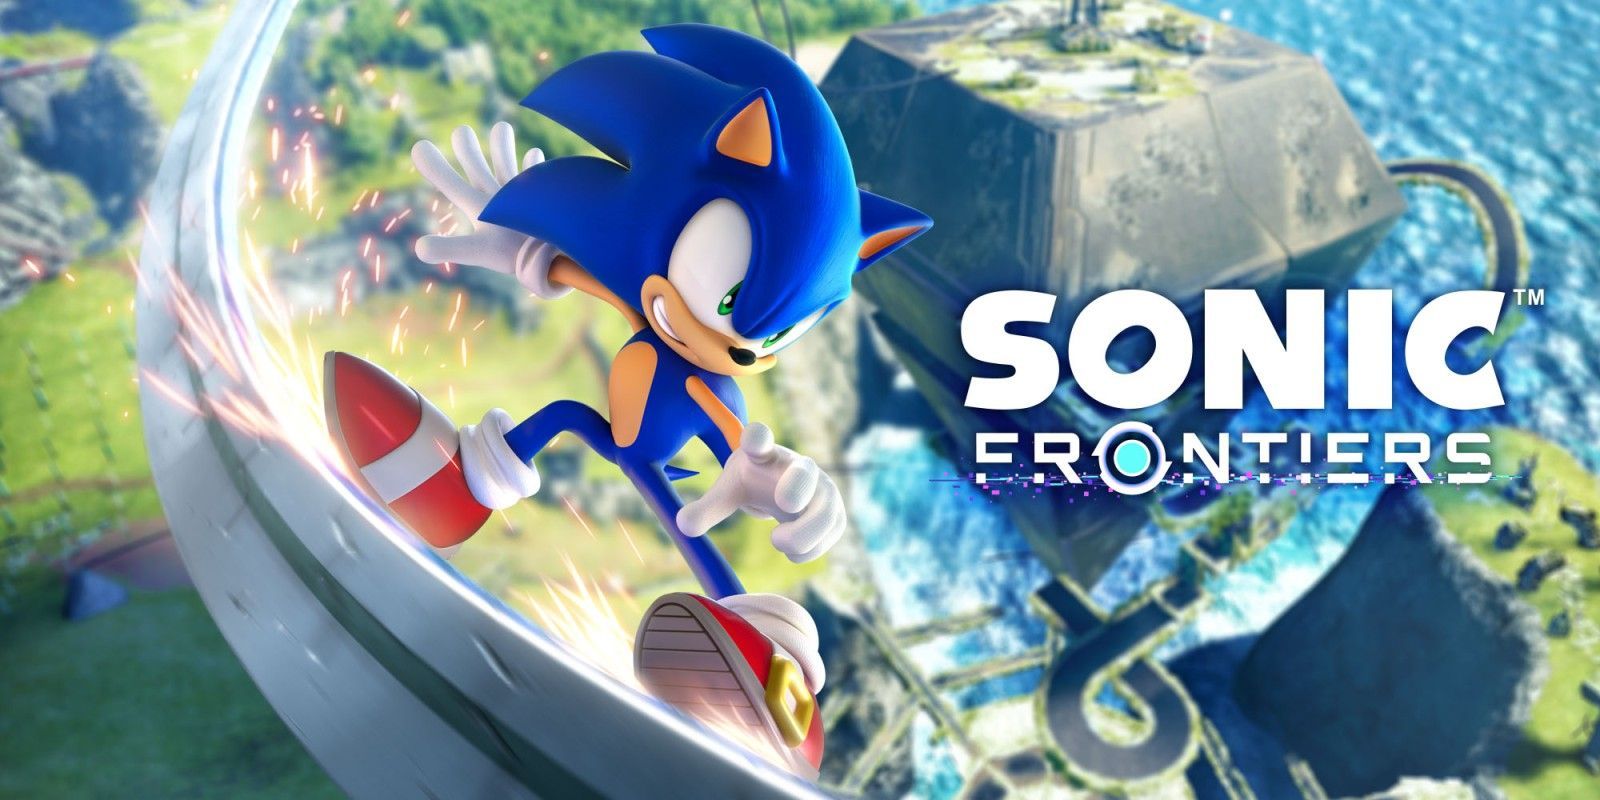 Sonic Frontiers - SEGA annonce une nouvelle mise à jour ! - GEEKNPLAY Home, News, Nintendo Switch, PC, PlayStation 4, PlayStation 5, Séries/Films, Xbox One, Xbox Series X|S